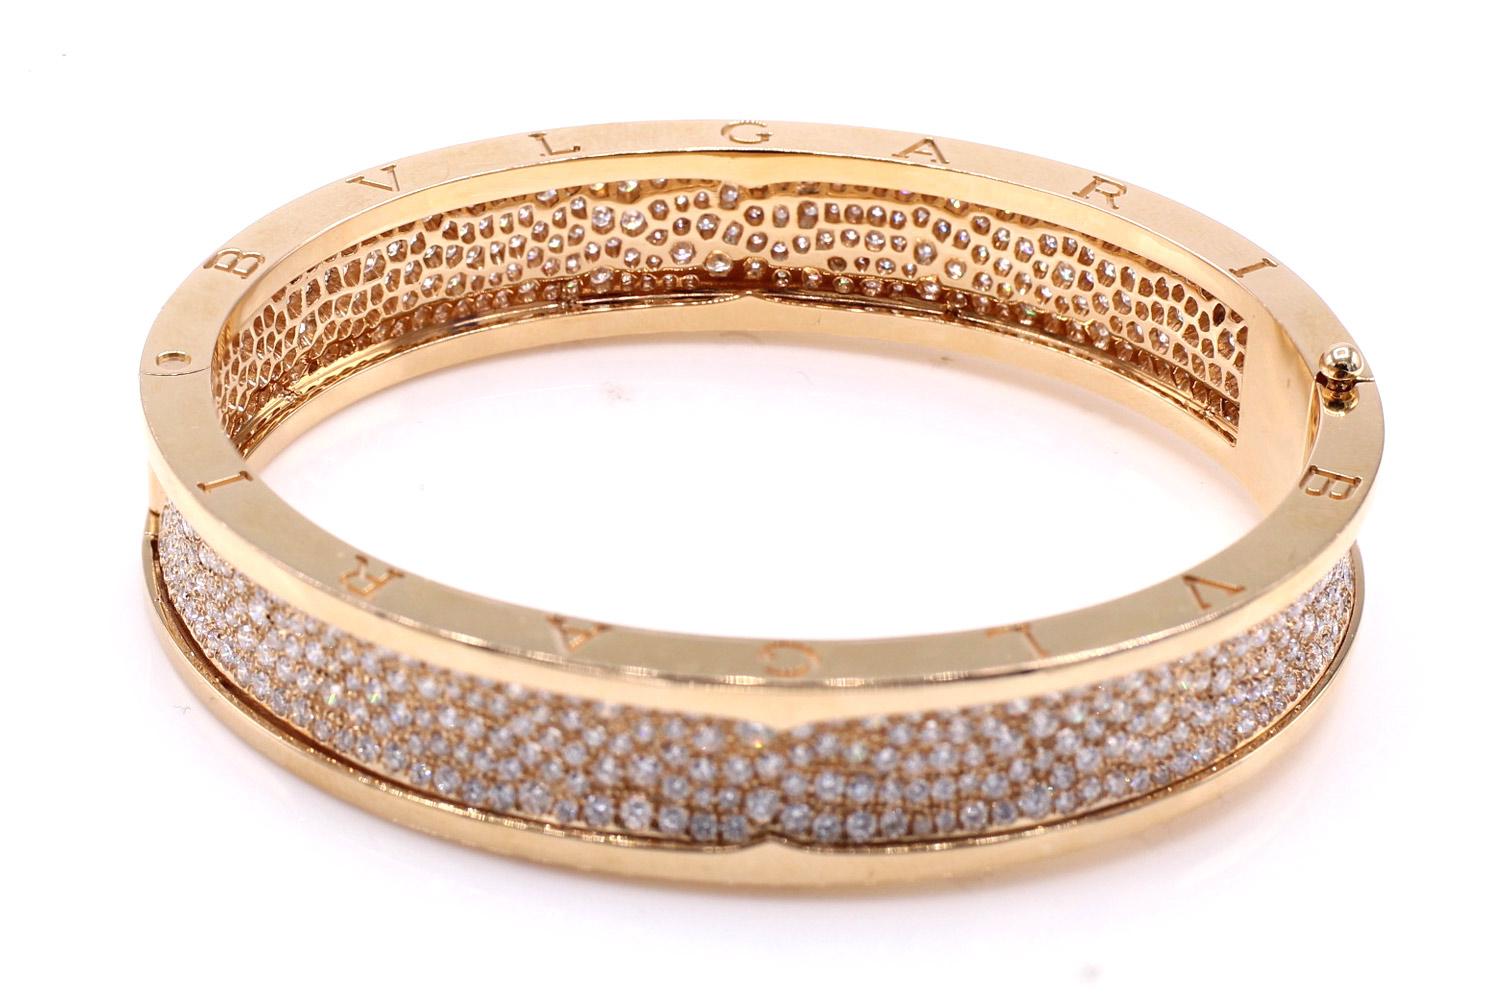 Masterfully handcrafted in 18 karat rose gold by the renown Italian jeweler Bulgari. This highly fashionable and extremely chic bangle bracelet is the largest size, 19, of the BZERO1 model and contains 11.60 carats of fine bright round brilliant cut